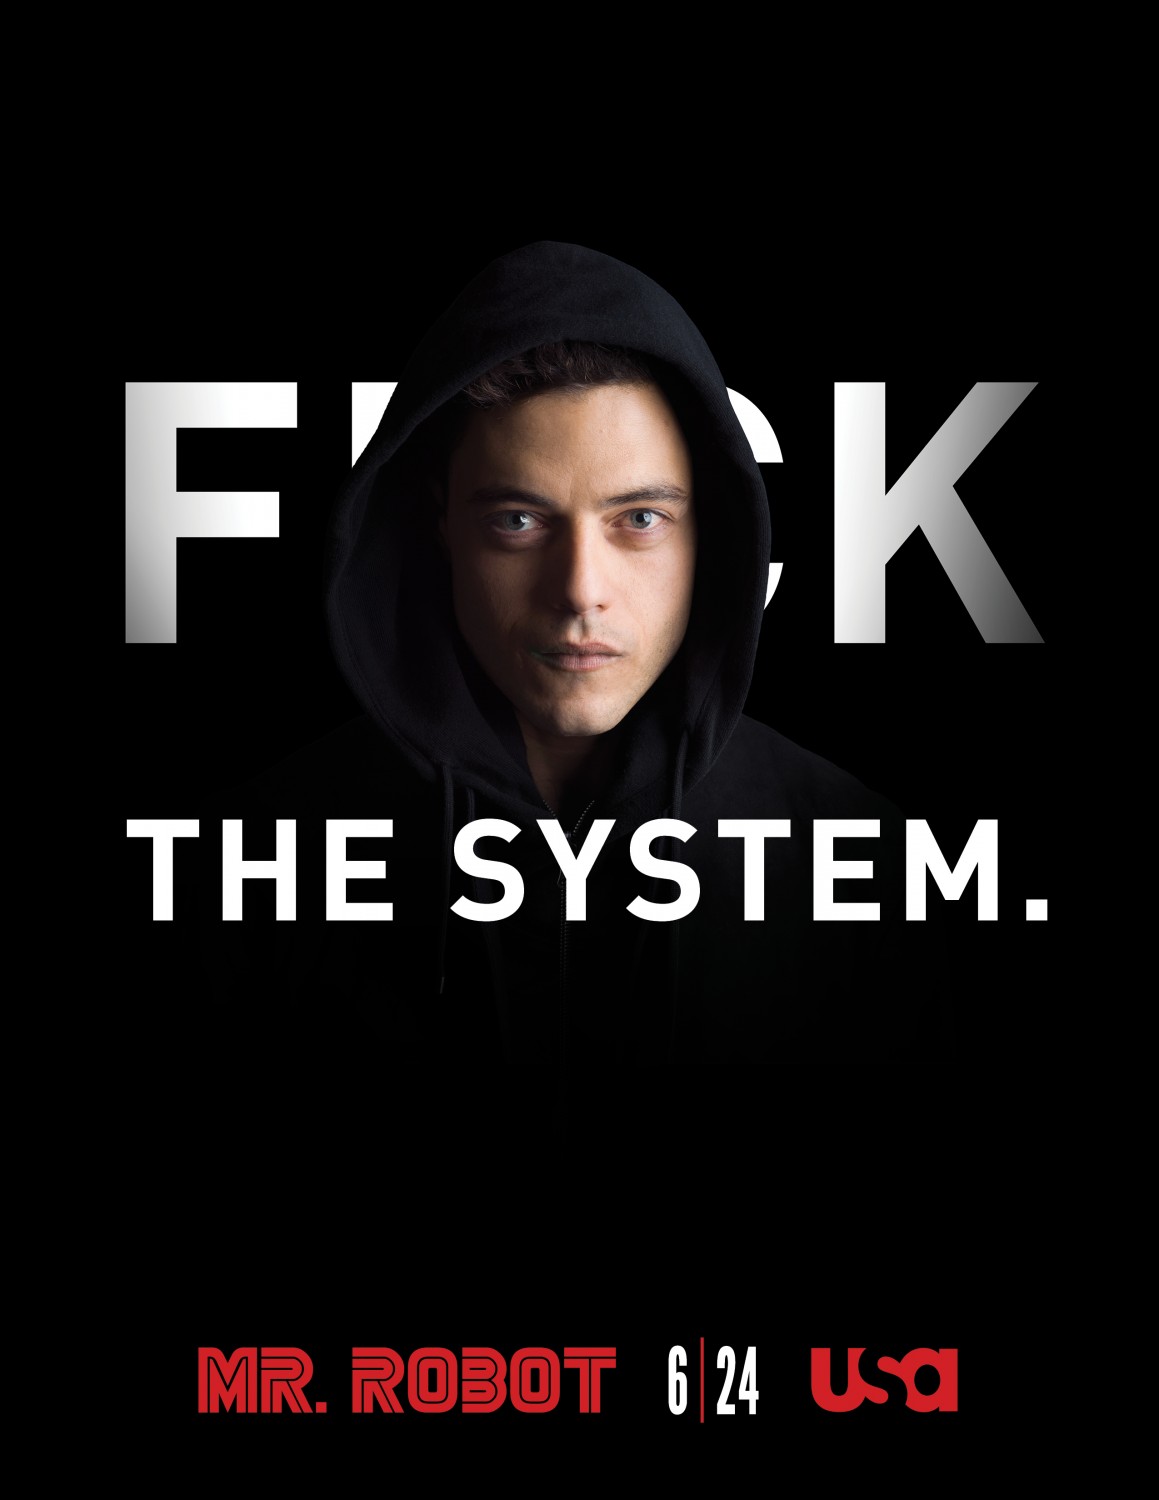 Extra Large TV Poster Image for Mr. Robot (#5 of 17)